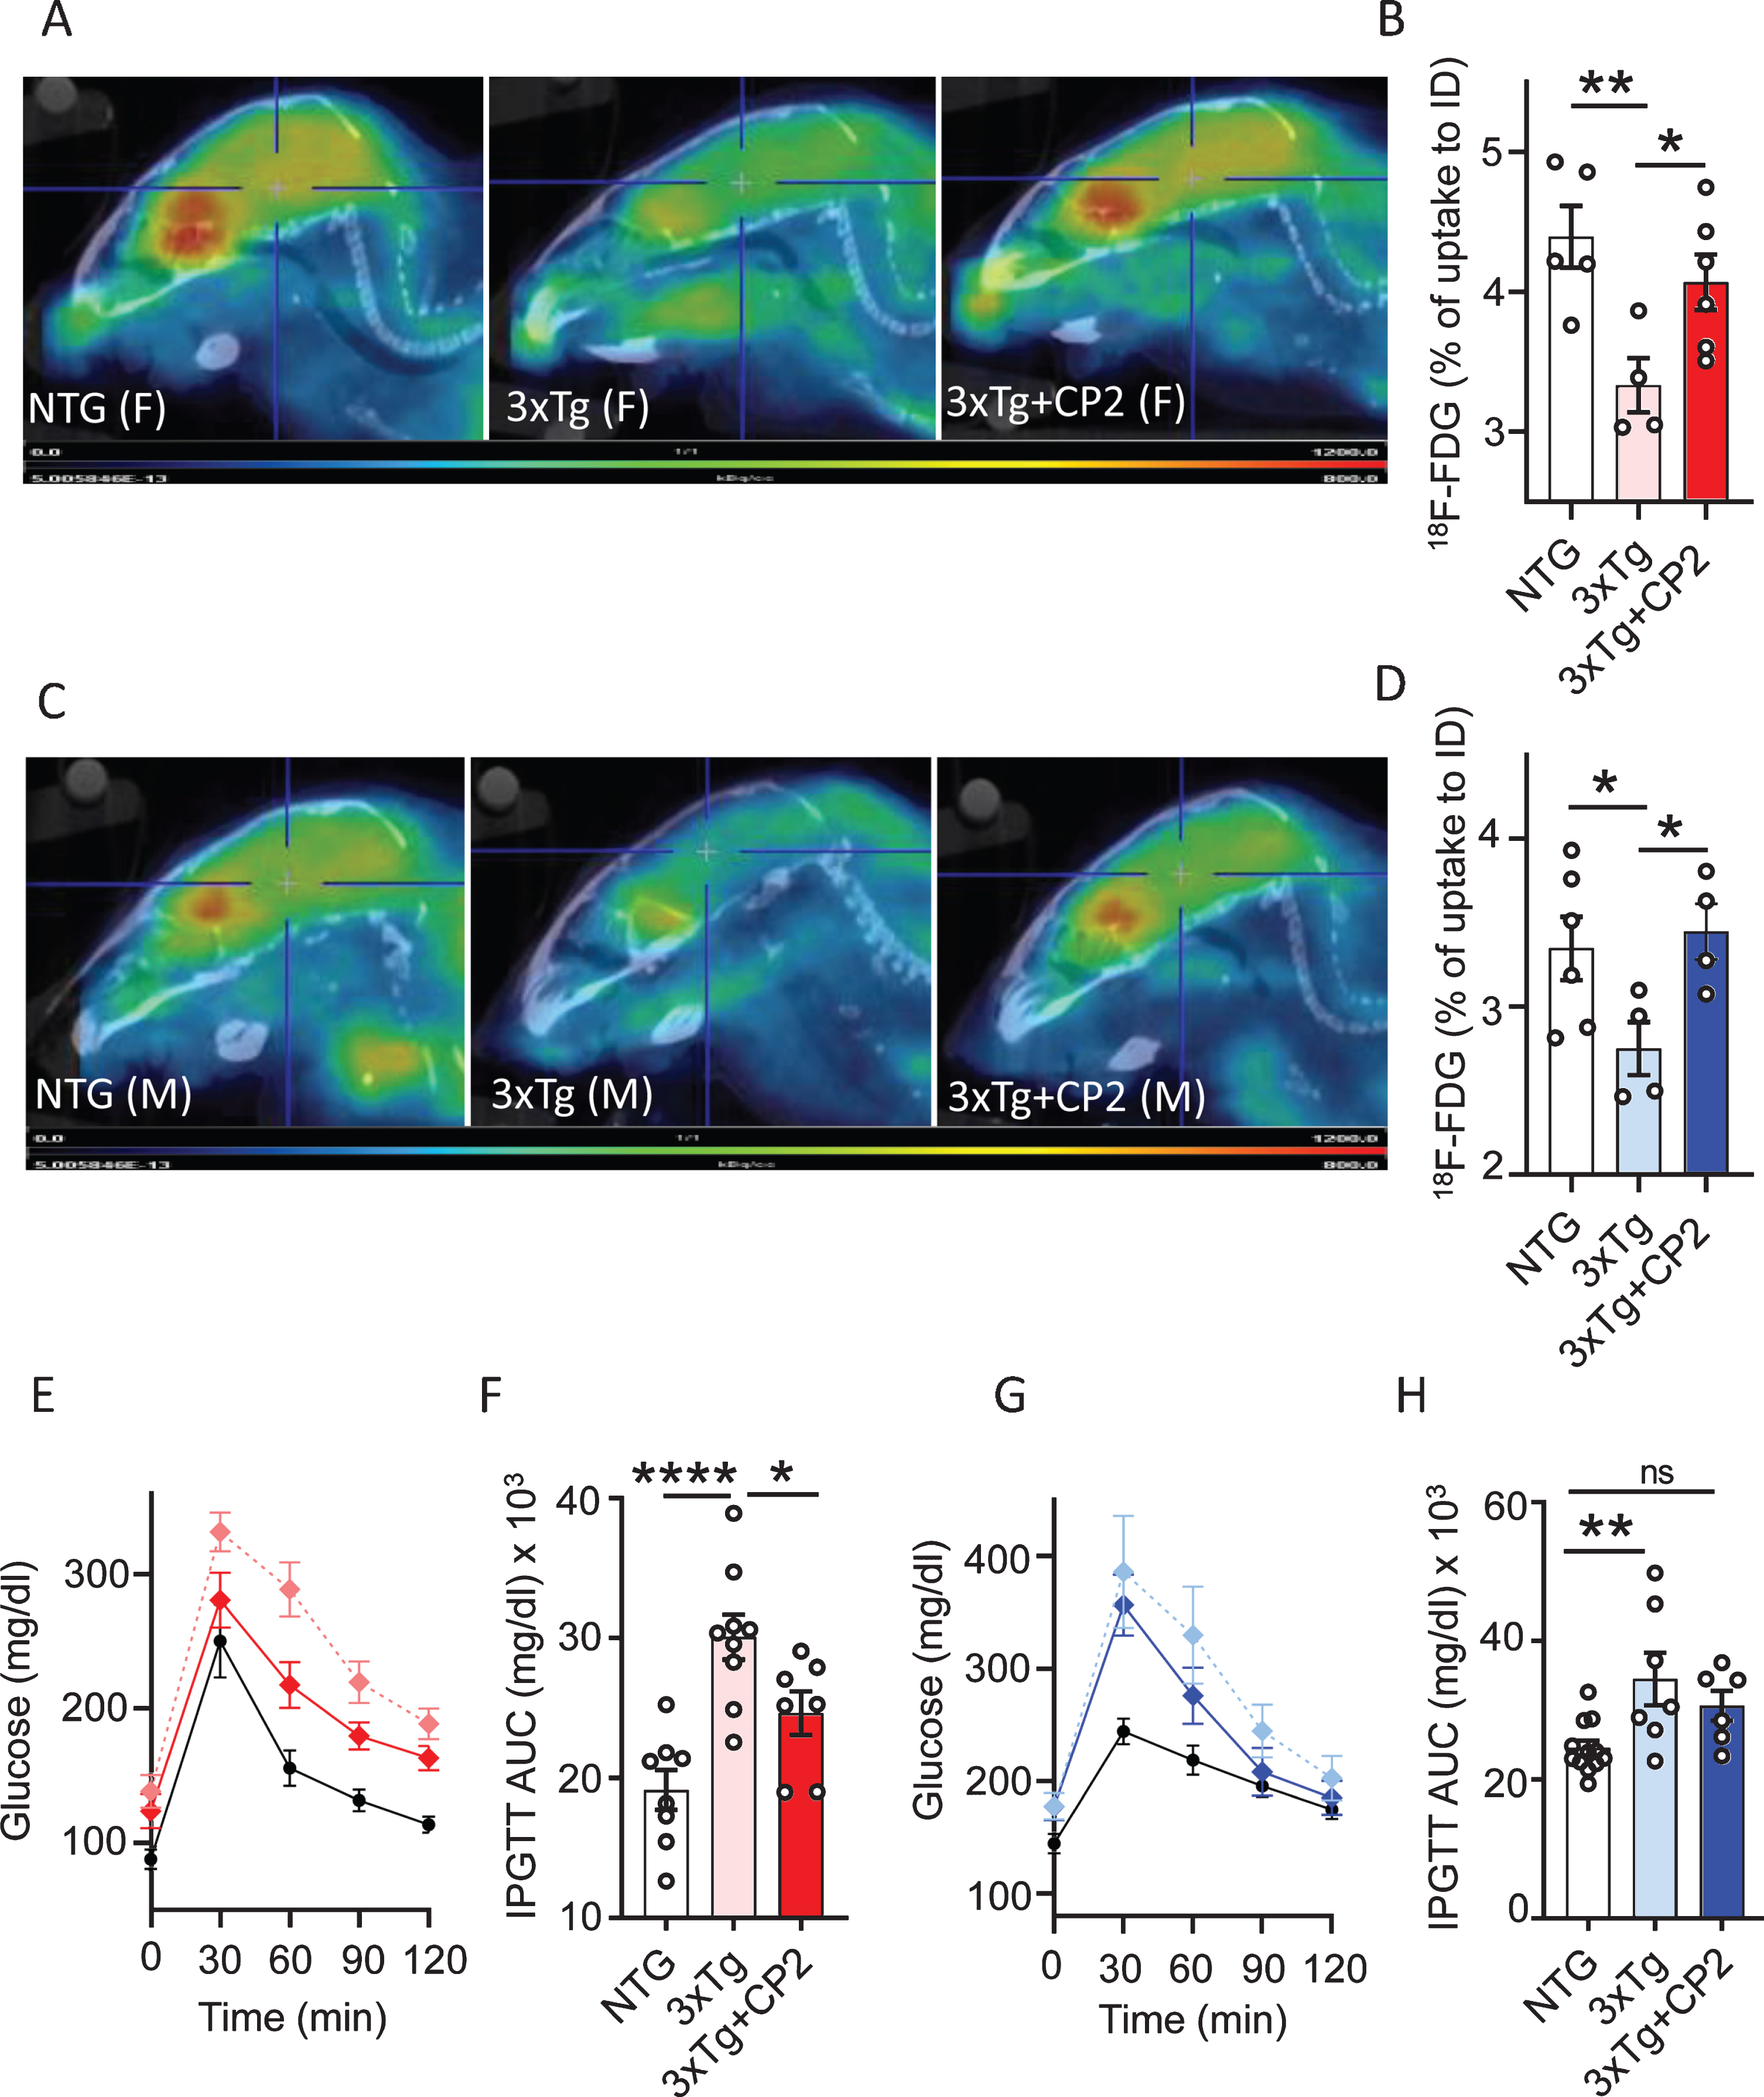 Chronic CP2 treatment improves glucose homeostasis in the brain and periphery in 3xTg-AD mice. A,C) Representative images of the 18F-fluorodeoxyglucose (18F-FDG) uptake in the brain of CP2-treated female (A) and male (C) 3xTg-AD mice compared to vehicle-treated age- and sex-matched 3xTg-AD and NTG mice measured using in vivo FDG-PET 14 months after the beginning of treatment. B,D) Quantification of glucose uptake measured using in vivo FDG-PET from (A and C) as a percent of changes compared to the initial dose (ID). N= 5 mice per each group. E,F) CP2 treatment improves glucose tolerance in 3xTg-AD female mice measured by intraperitoneal glucose tolerance test (IPGTT). F) Calculation of Area Under the Curve (AUC) for figure (E). N = 6 –12 mice per group. G,H) CP2 treatment did not significantly improve glucose tolerance in 3xTg-AD male mice. H) Calculation of AUC for figure (G). N= 6–12 mice per group. Differences between individual groups were analyzed by one-way ANOVA with Fisher’s post-hoc test. Data are presented as mean±SEM. *p < 0.05, **p < 0.01, ****p < 0.0001. Dotted light blue and light red: vehicle-treated 3xTg-AD male and female mice, respectfully; dark blue and dark red: 3xTg-AD+CP2 male and female mice, respectfully; black: vehicle-treated NTG (female mice in E; male mice in G).